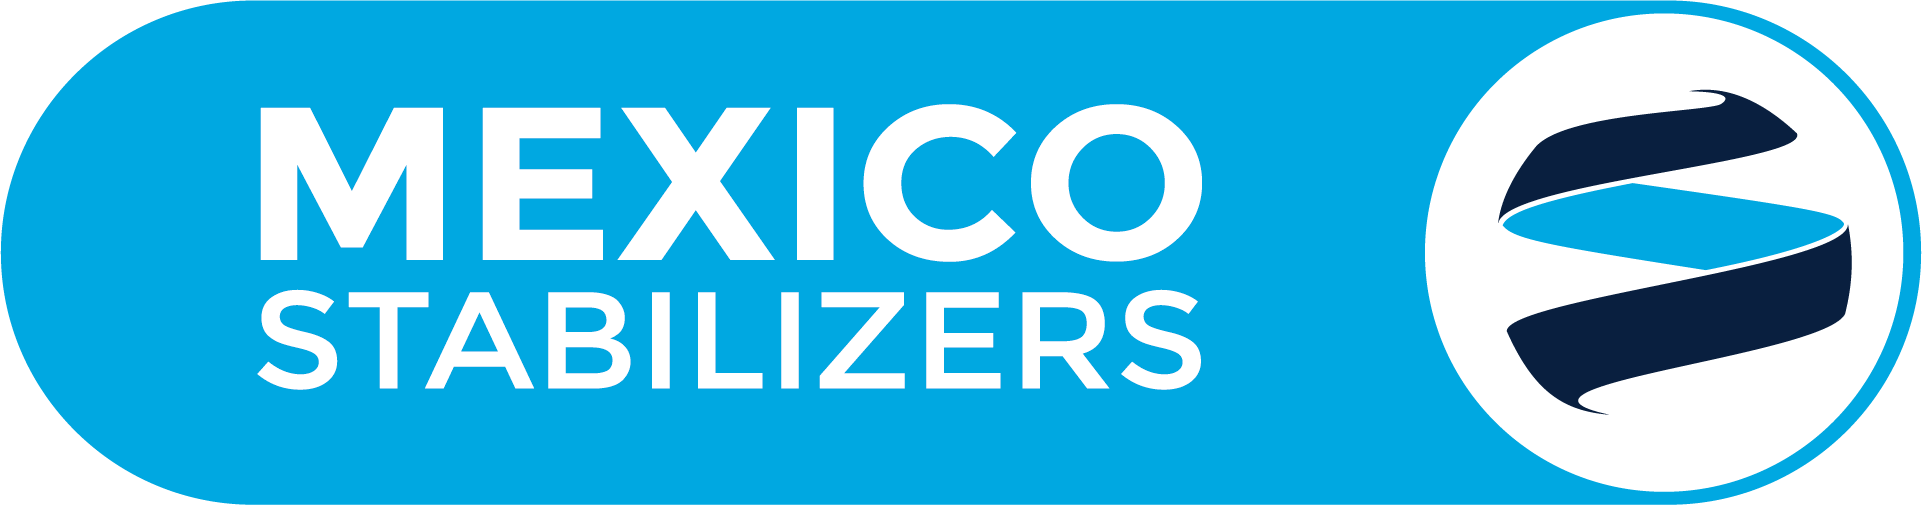 Mexico Stabilizers